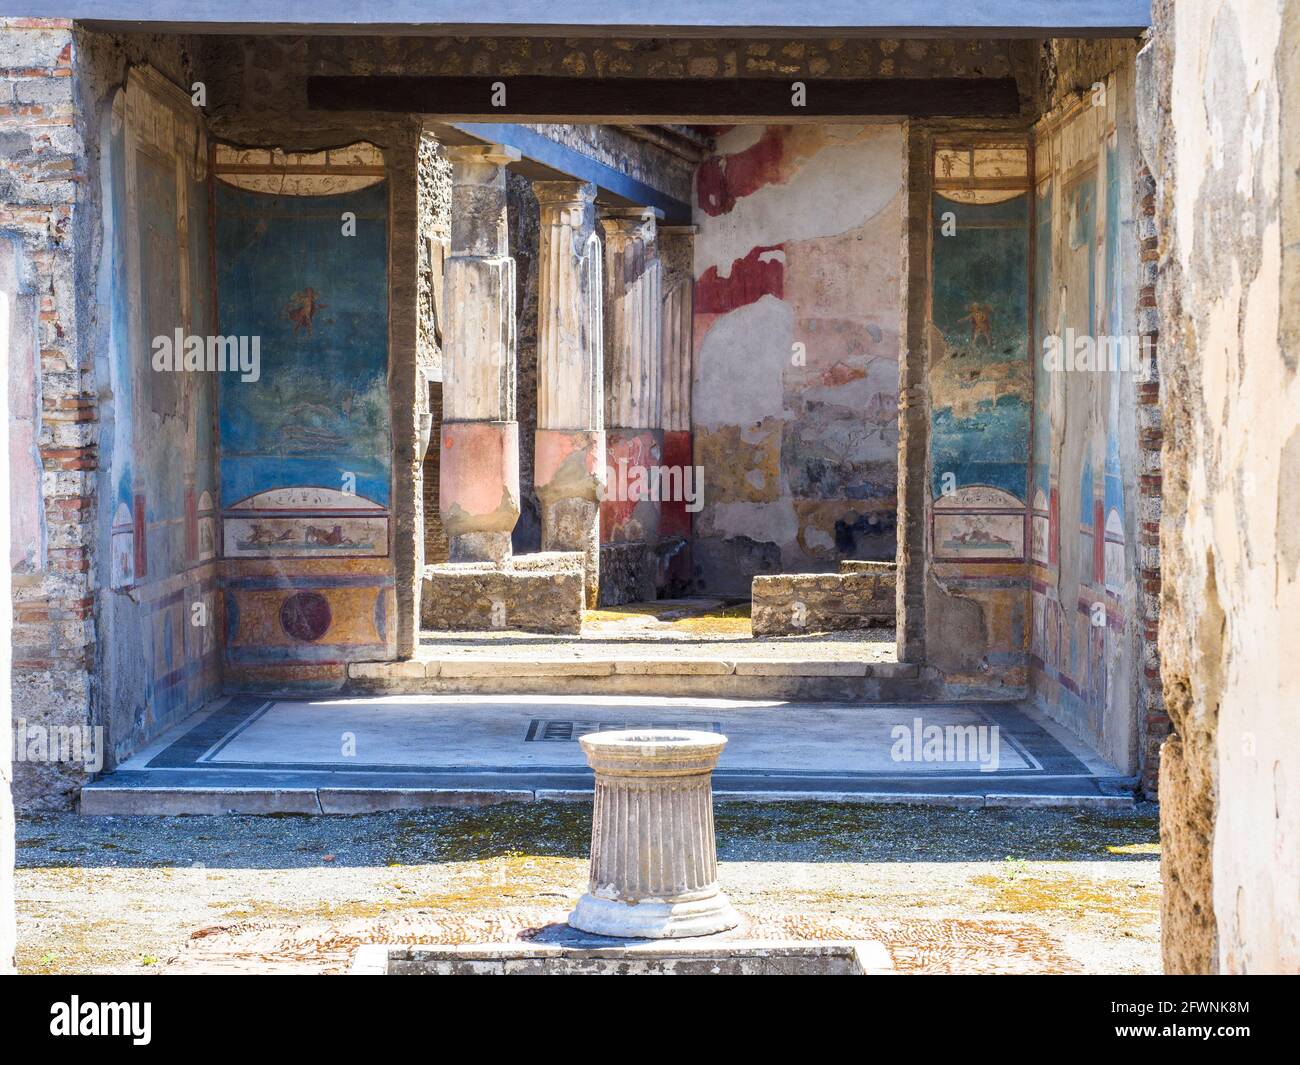 House of the Ancient Hunt (Casa della Caccia Antica) - Pompeii archaeological site, Italy The house, dating back to the 2nd century BC, fully represents the typical layout of a Roman house with an entrance, atrium and tablinum all on a single axis. Stock Photo